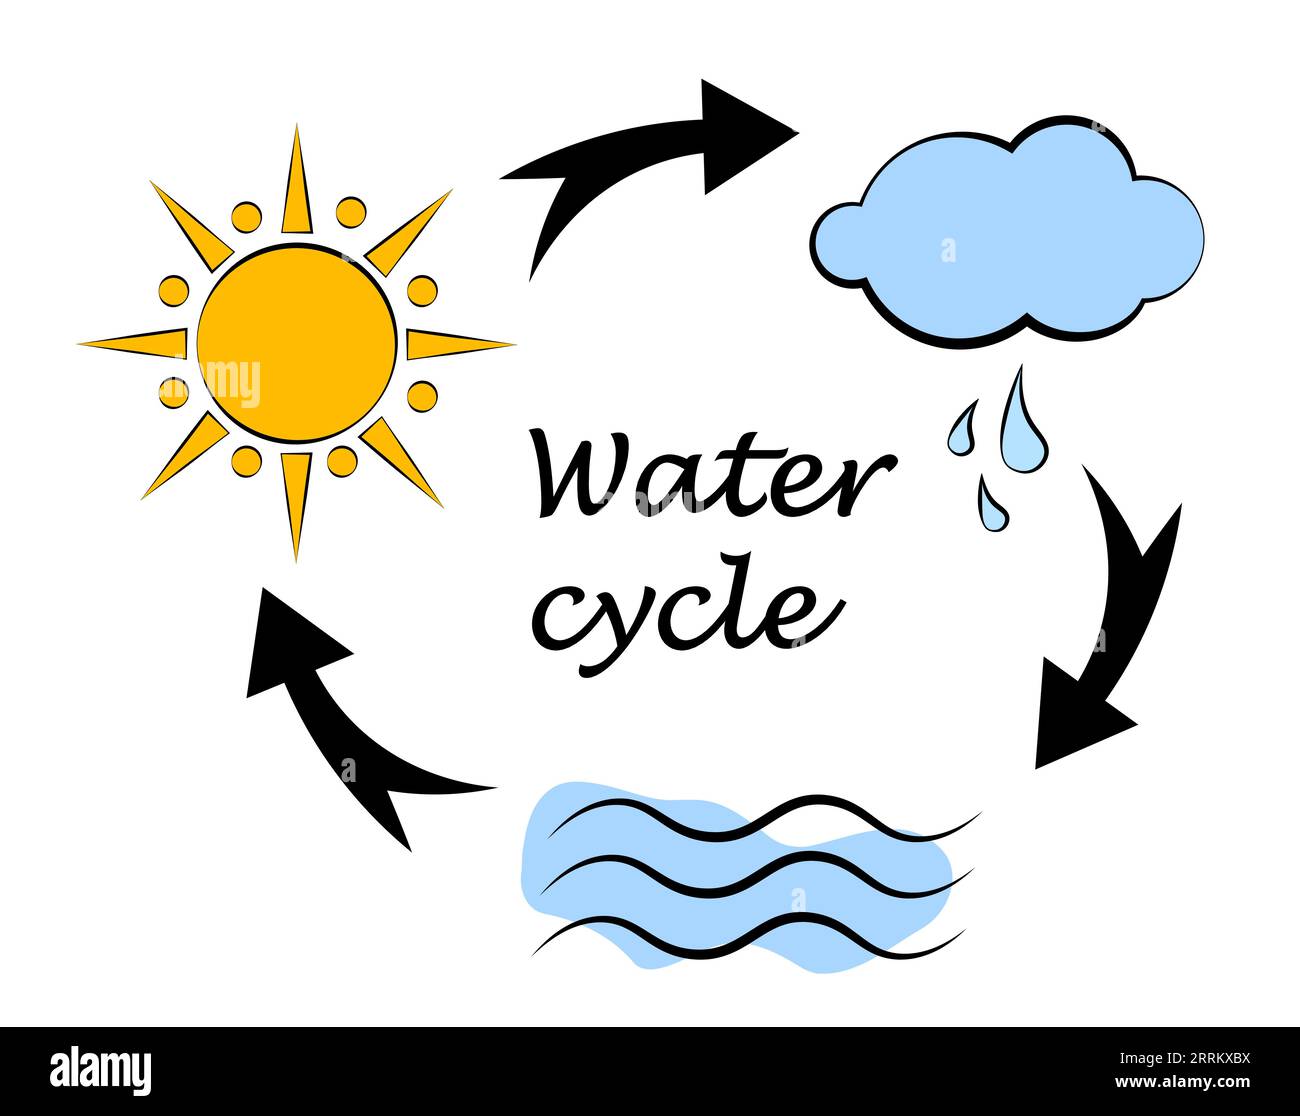 Water Cycle Diagram Sun Which Drives Stock Vector (Royalty Free) 324987095  | Shutterstock